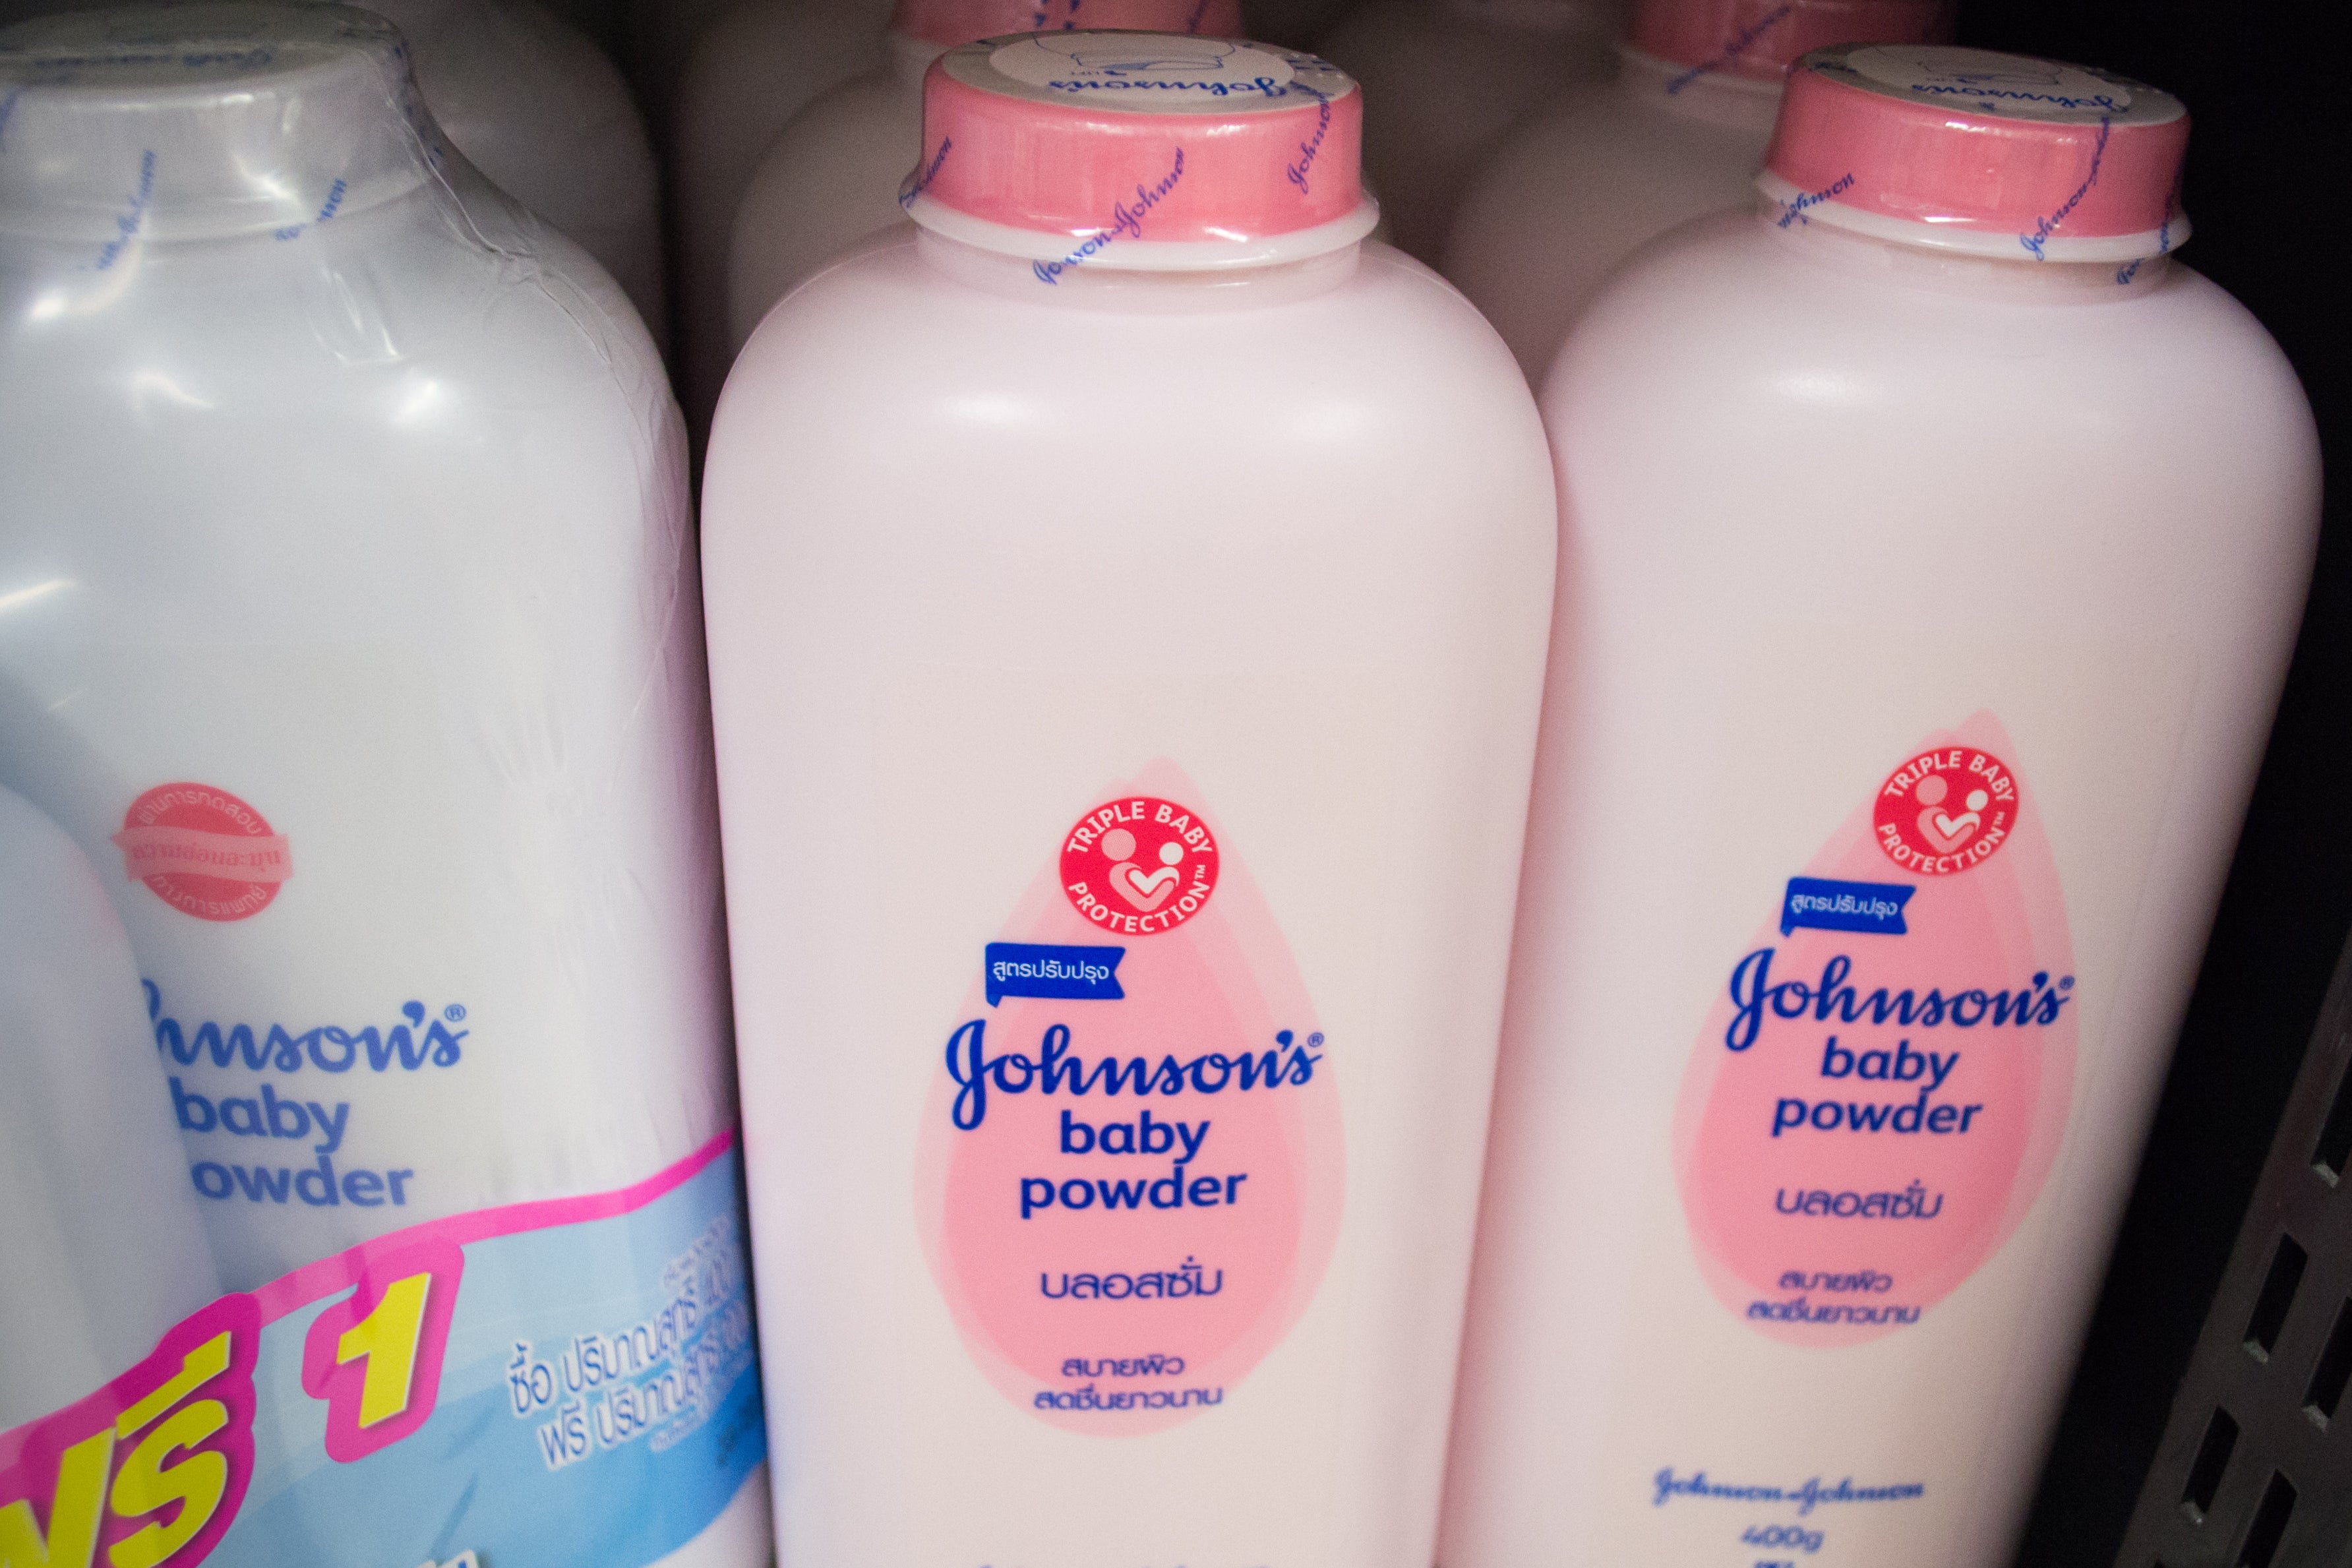 J&J’s talc-powder has already been discontinued in the US and Canada